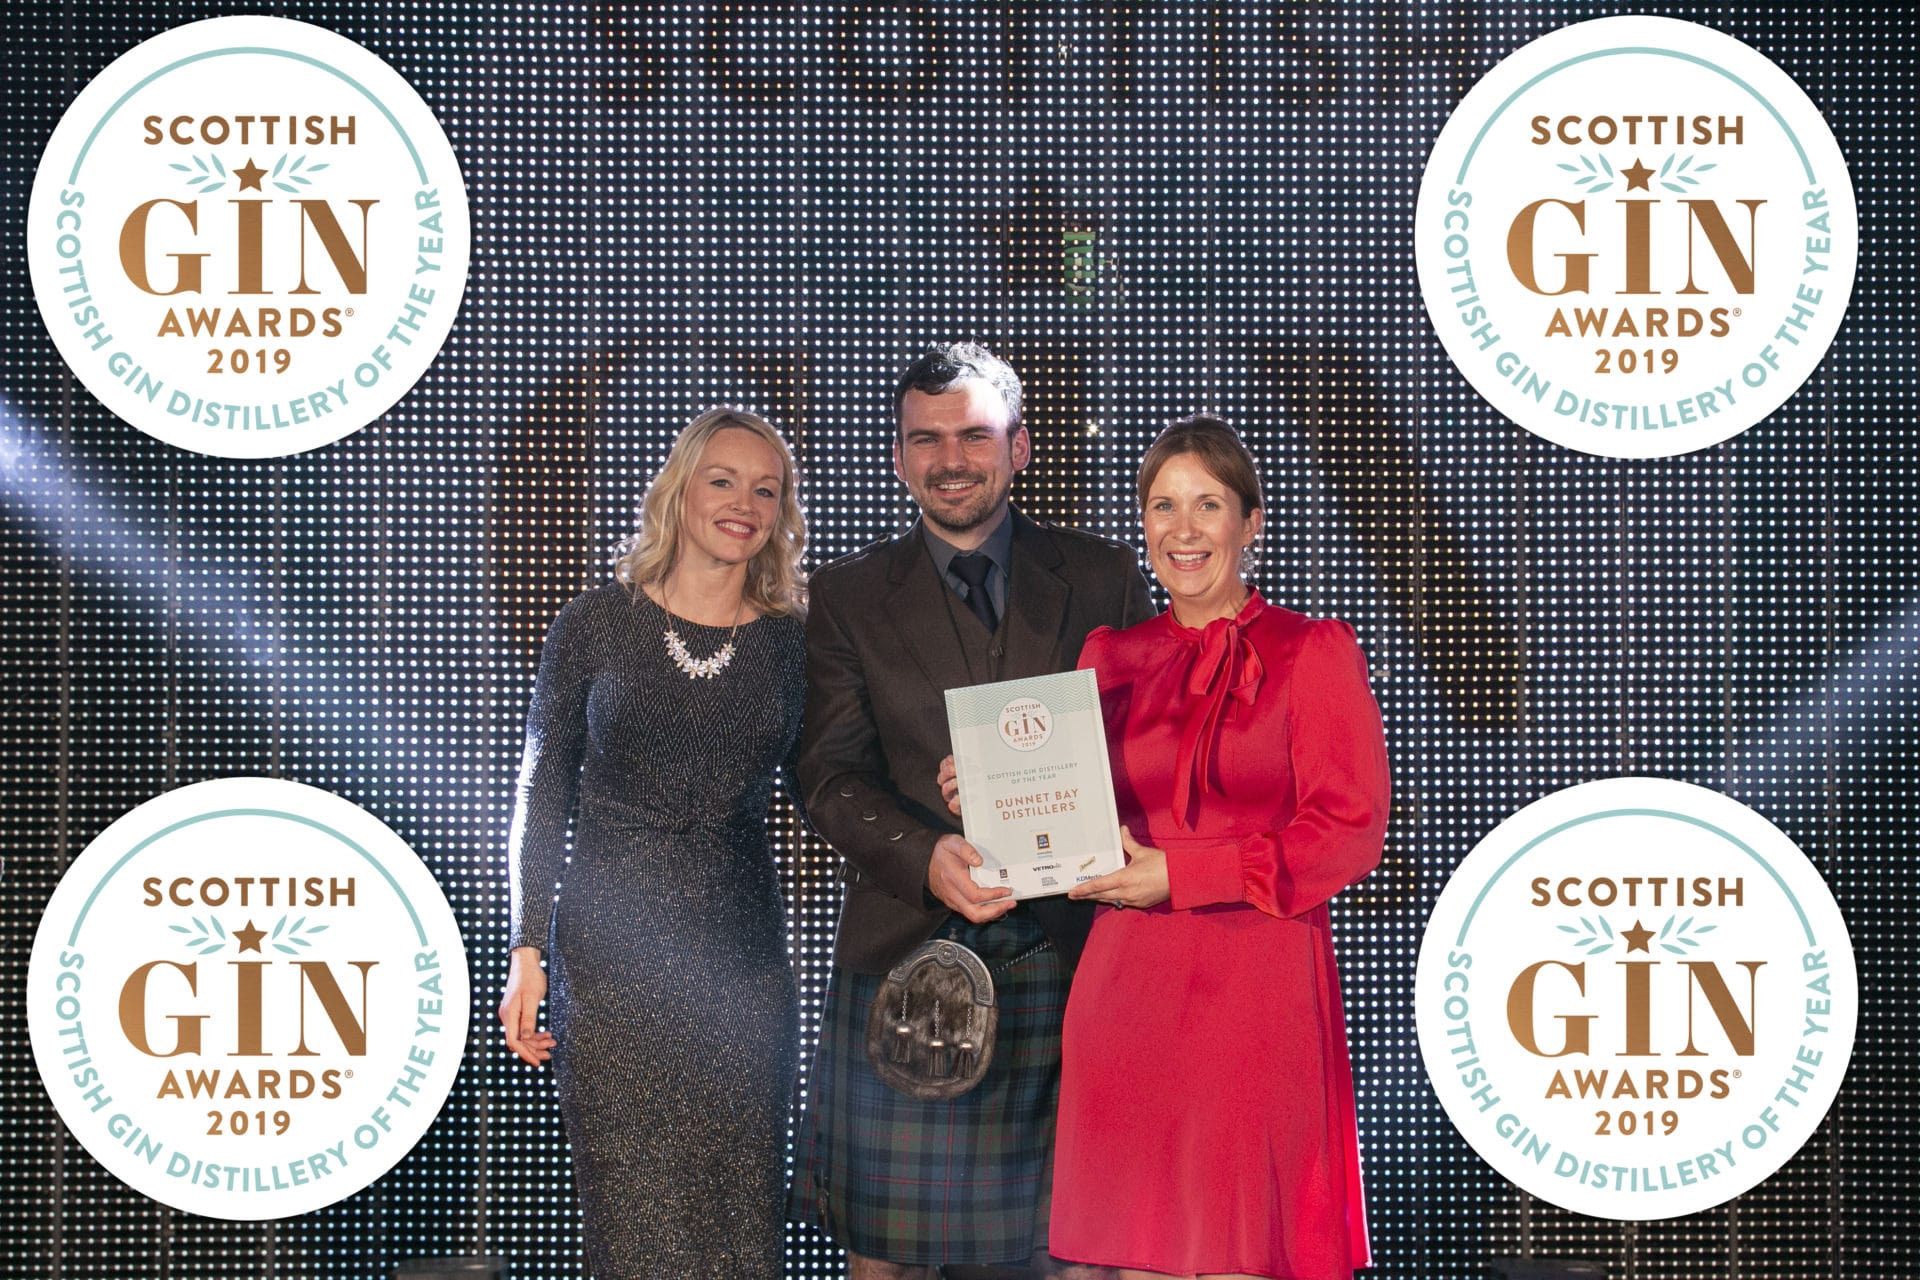 Martin & Claire Murray, owners of Dunnet Bay Distillery, receiving the Scottish Gin Award for Gin Distillery of the year!